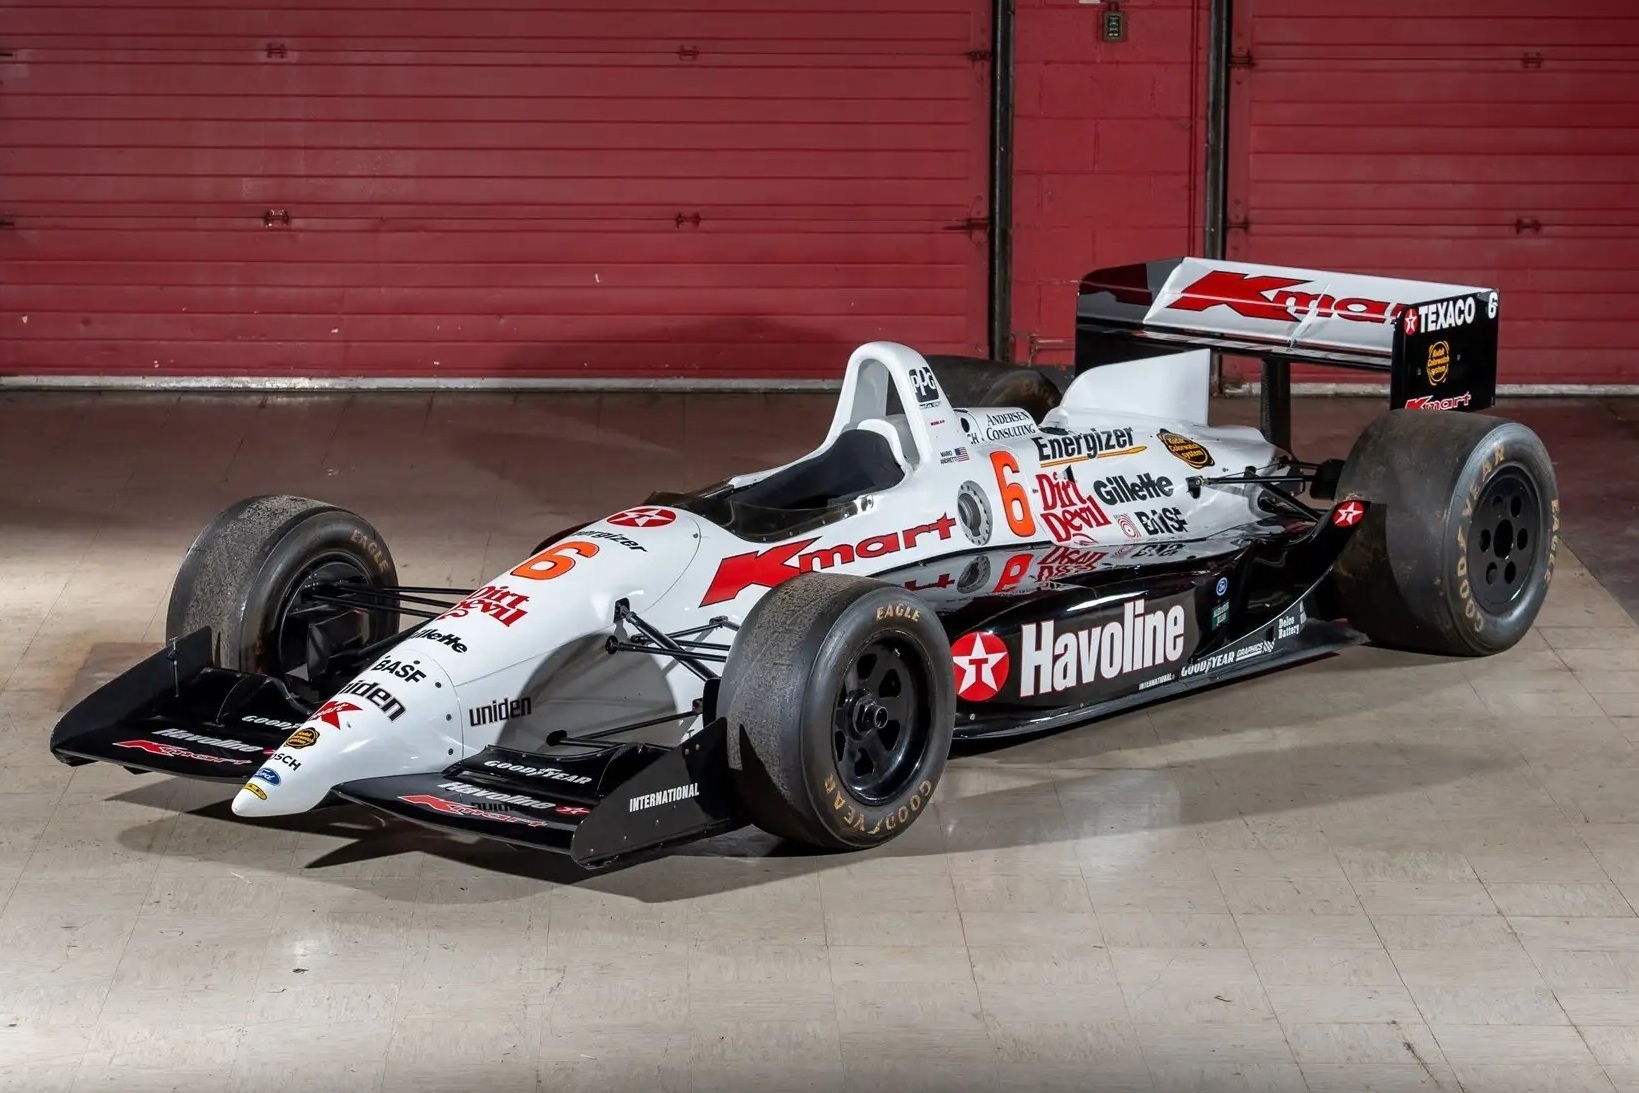 Massive Newmanhaas Indycar Collection Up For Auction